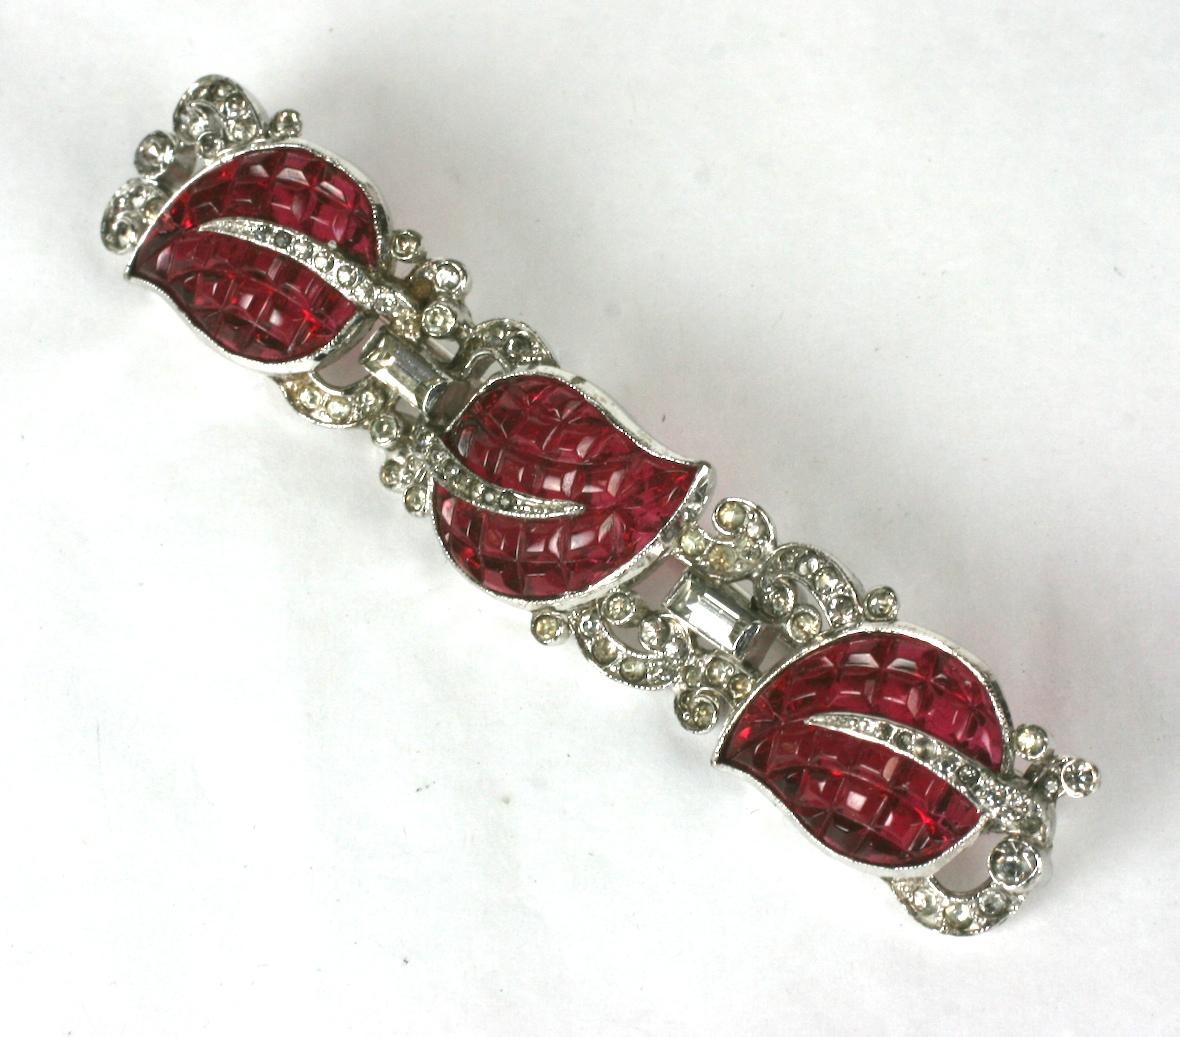 Trifari Alfred Philippe Invisibly set KTF ruby leaf art deco brooch. Bar form composed of three invisibly set glass leaves, crystal pave and baguettes set in rhodium plated base metal.
This brooch is characteristic of patented KTF pieces from the